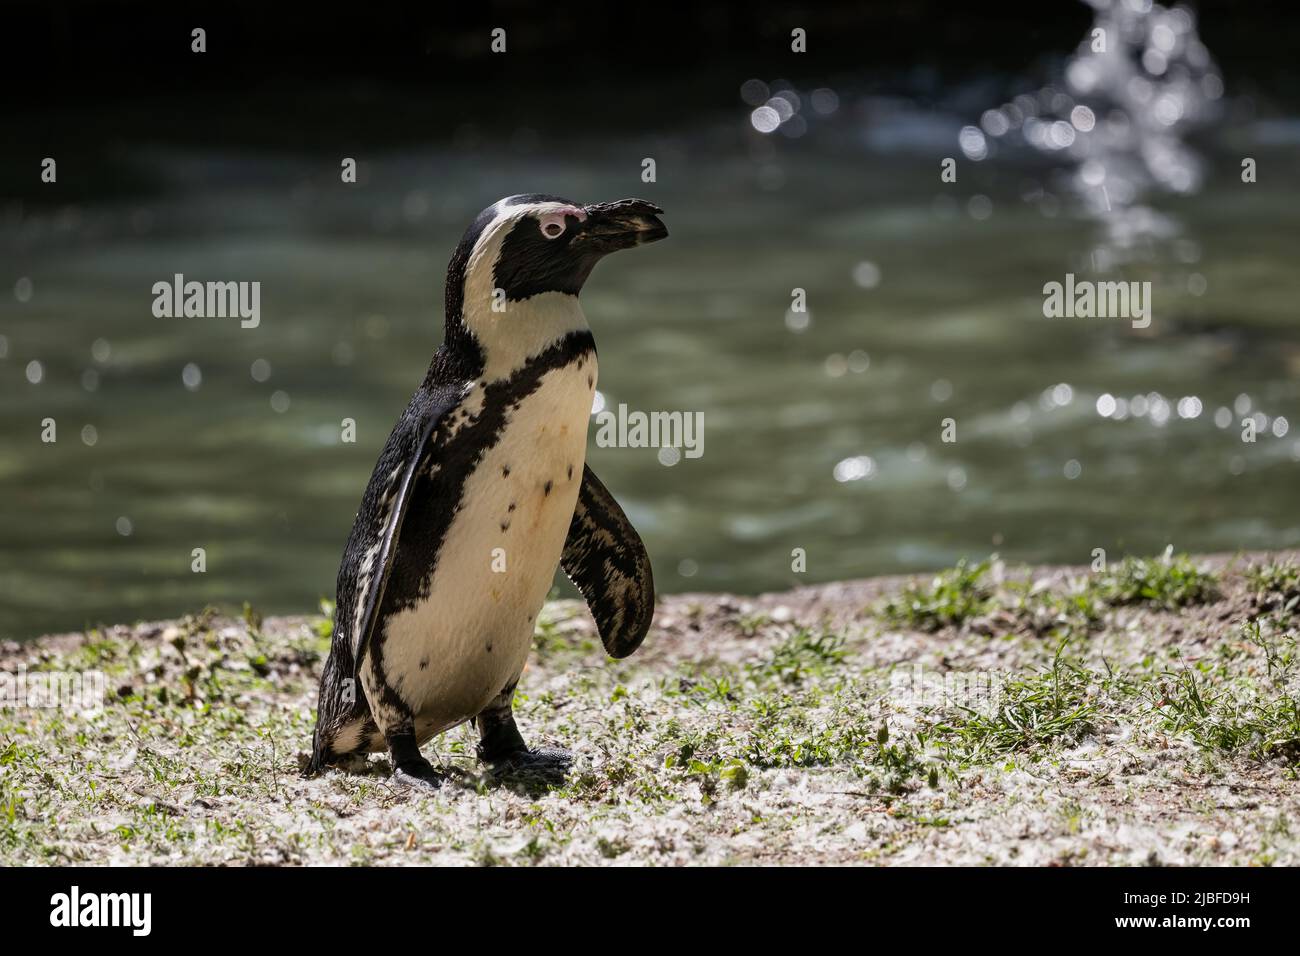 The African penguin (Spheniscus demersus) by the water, common names: Cape penguin or South African penguin, animal in the family: Spheniscidae. Stock Photo